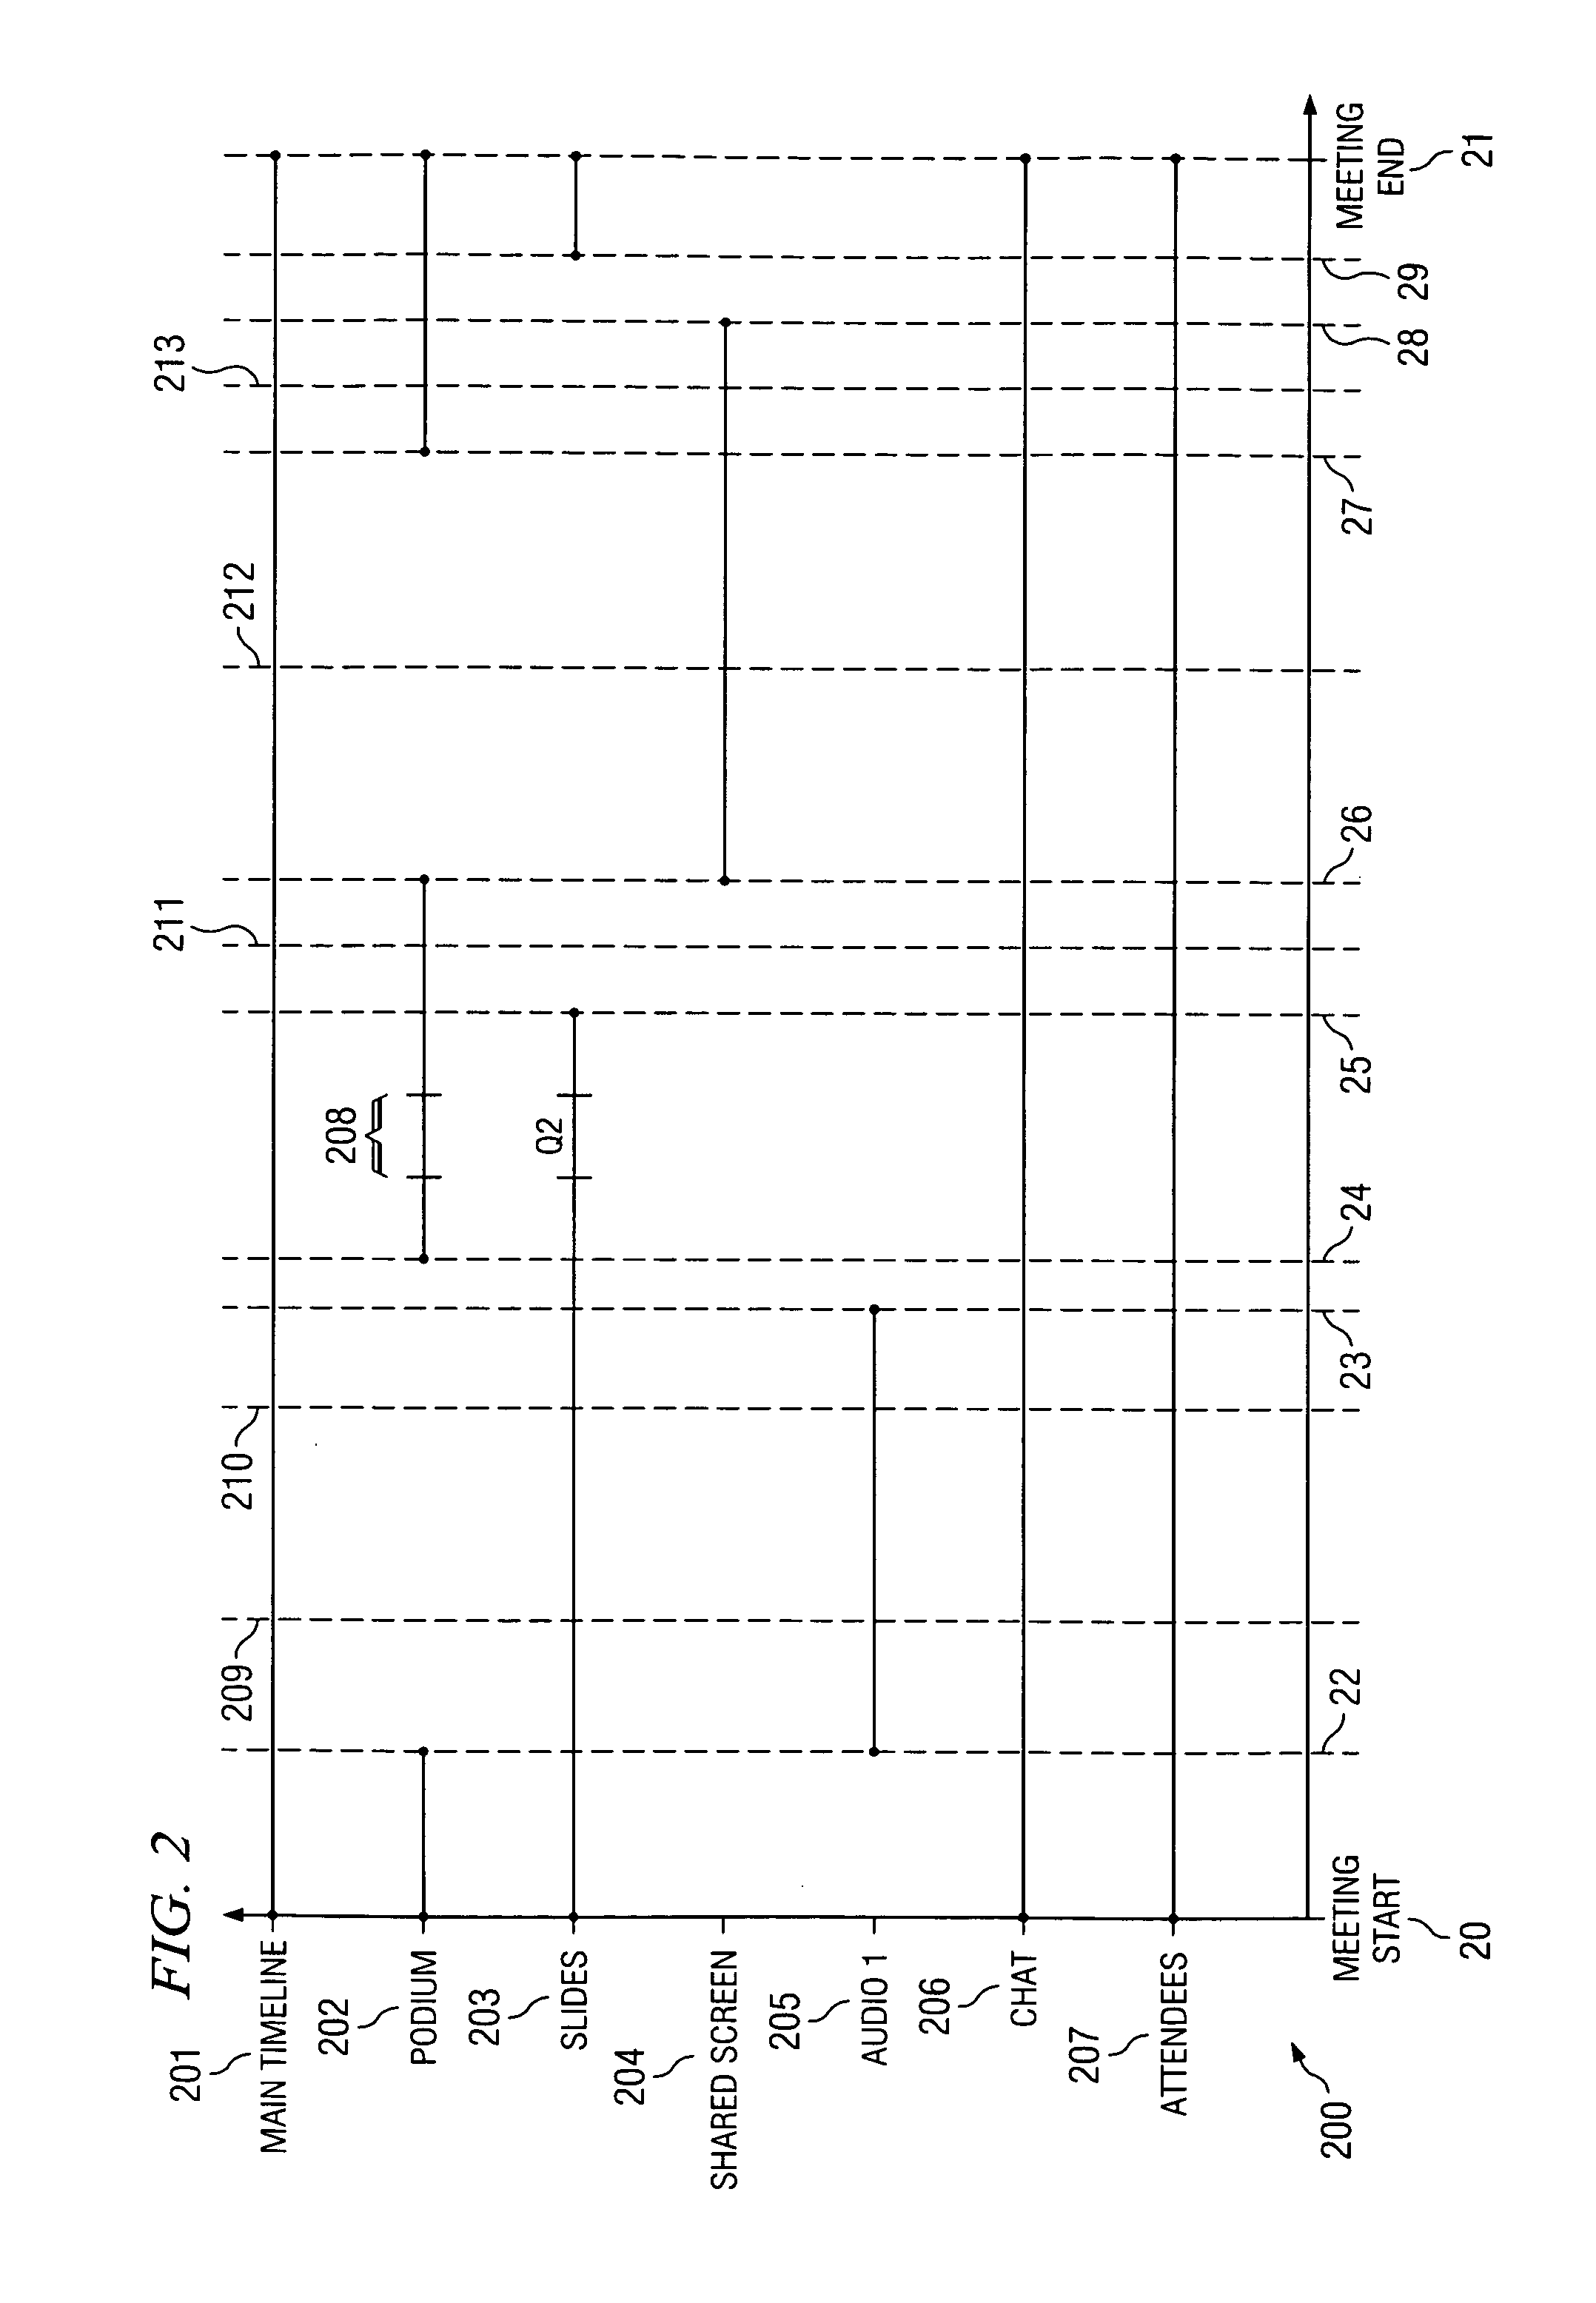 System and method for archiving collaborative electronic meetings